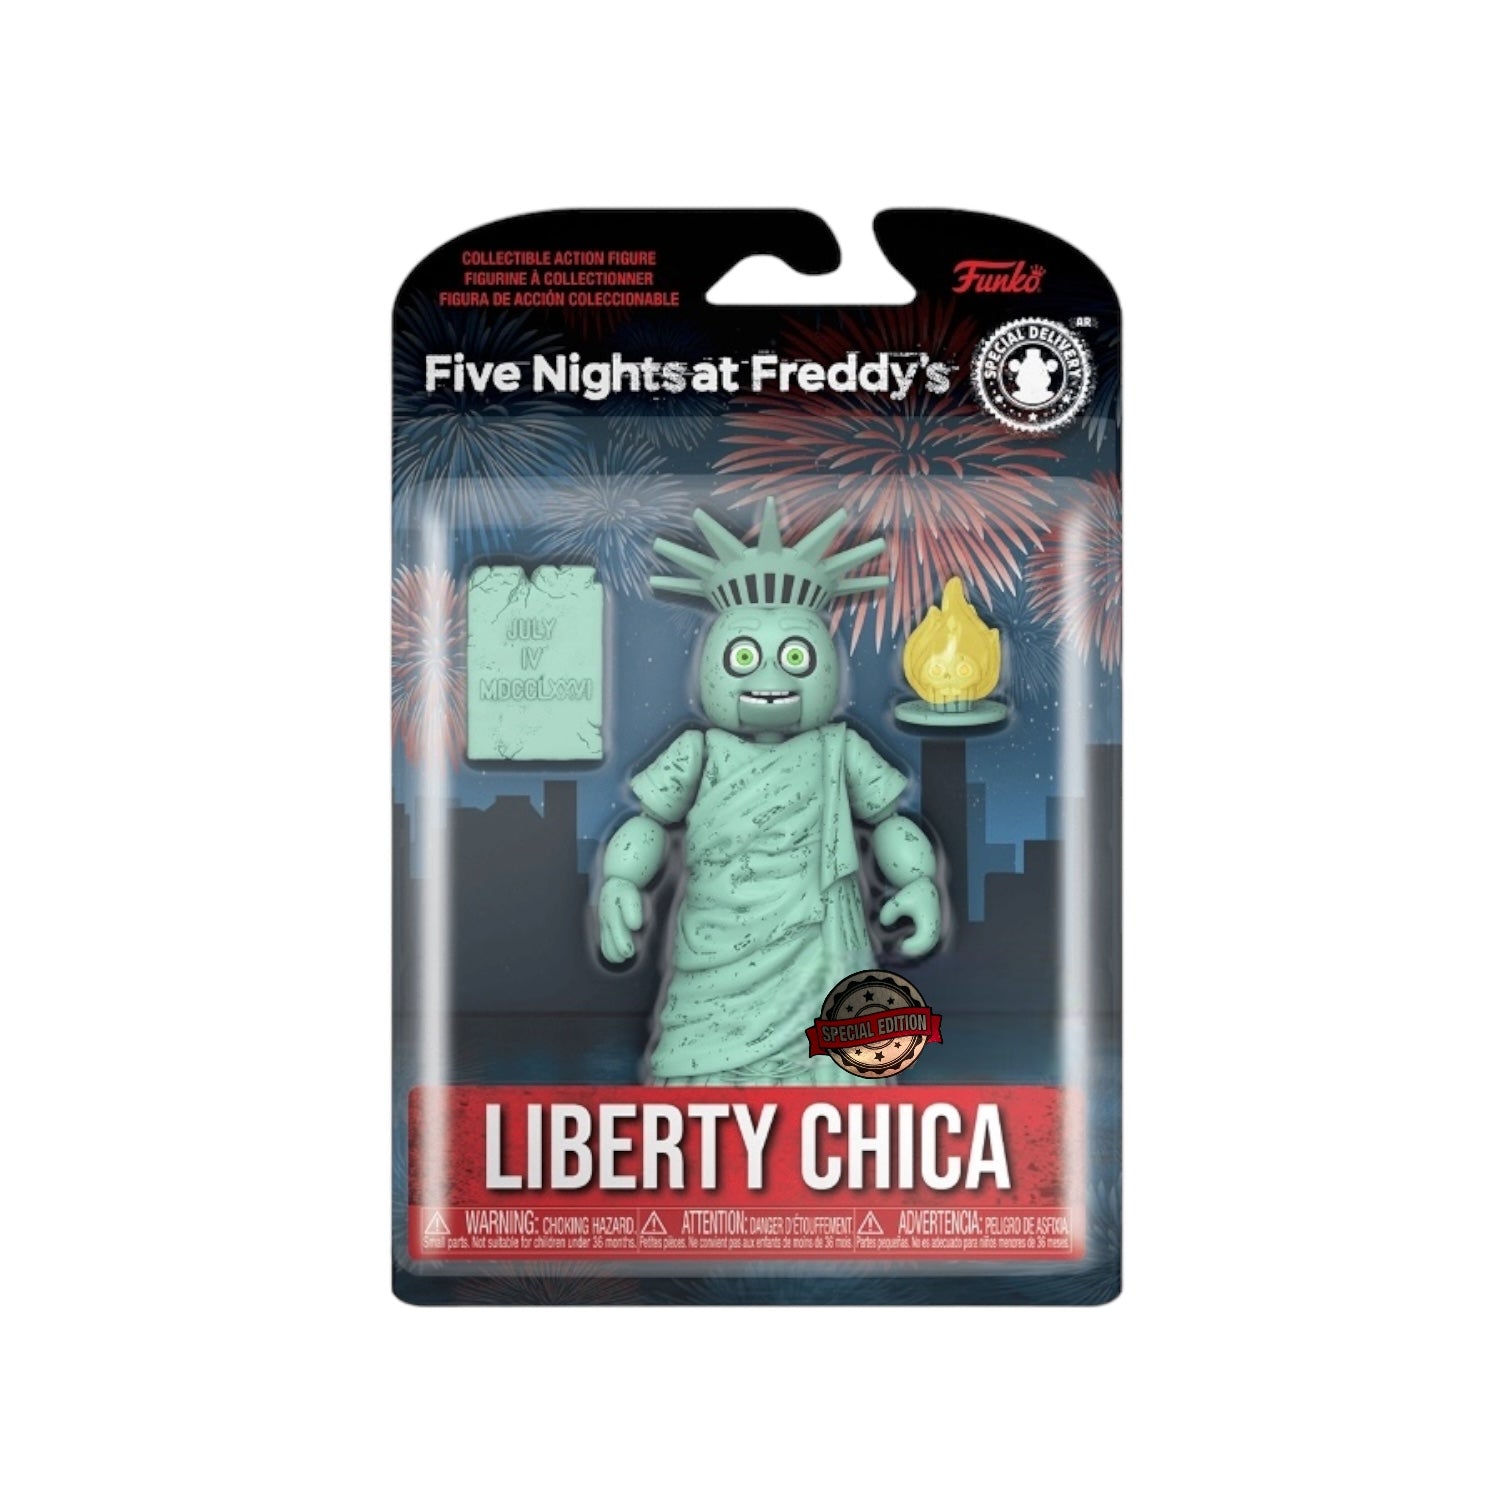 Liberty Chica - Funko Action Figure - Five Nights at Freddy's - Special Edition